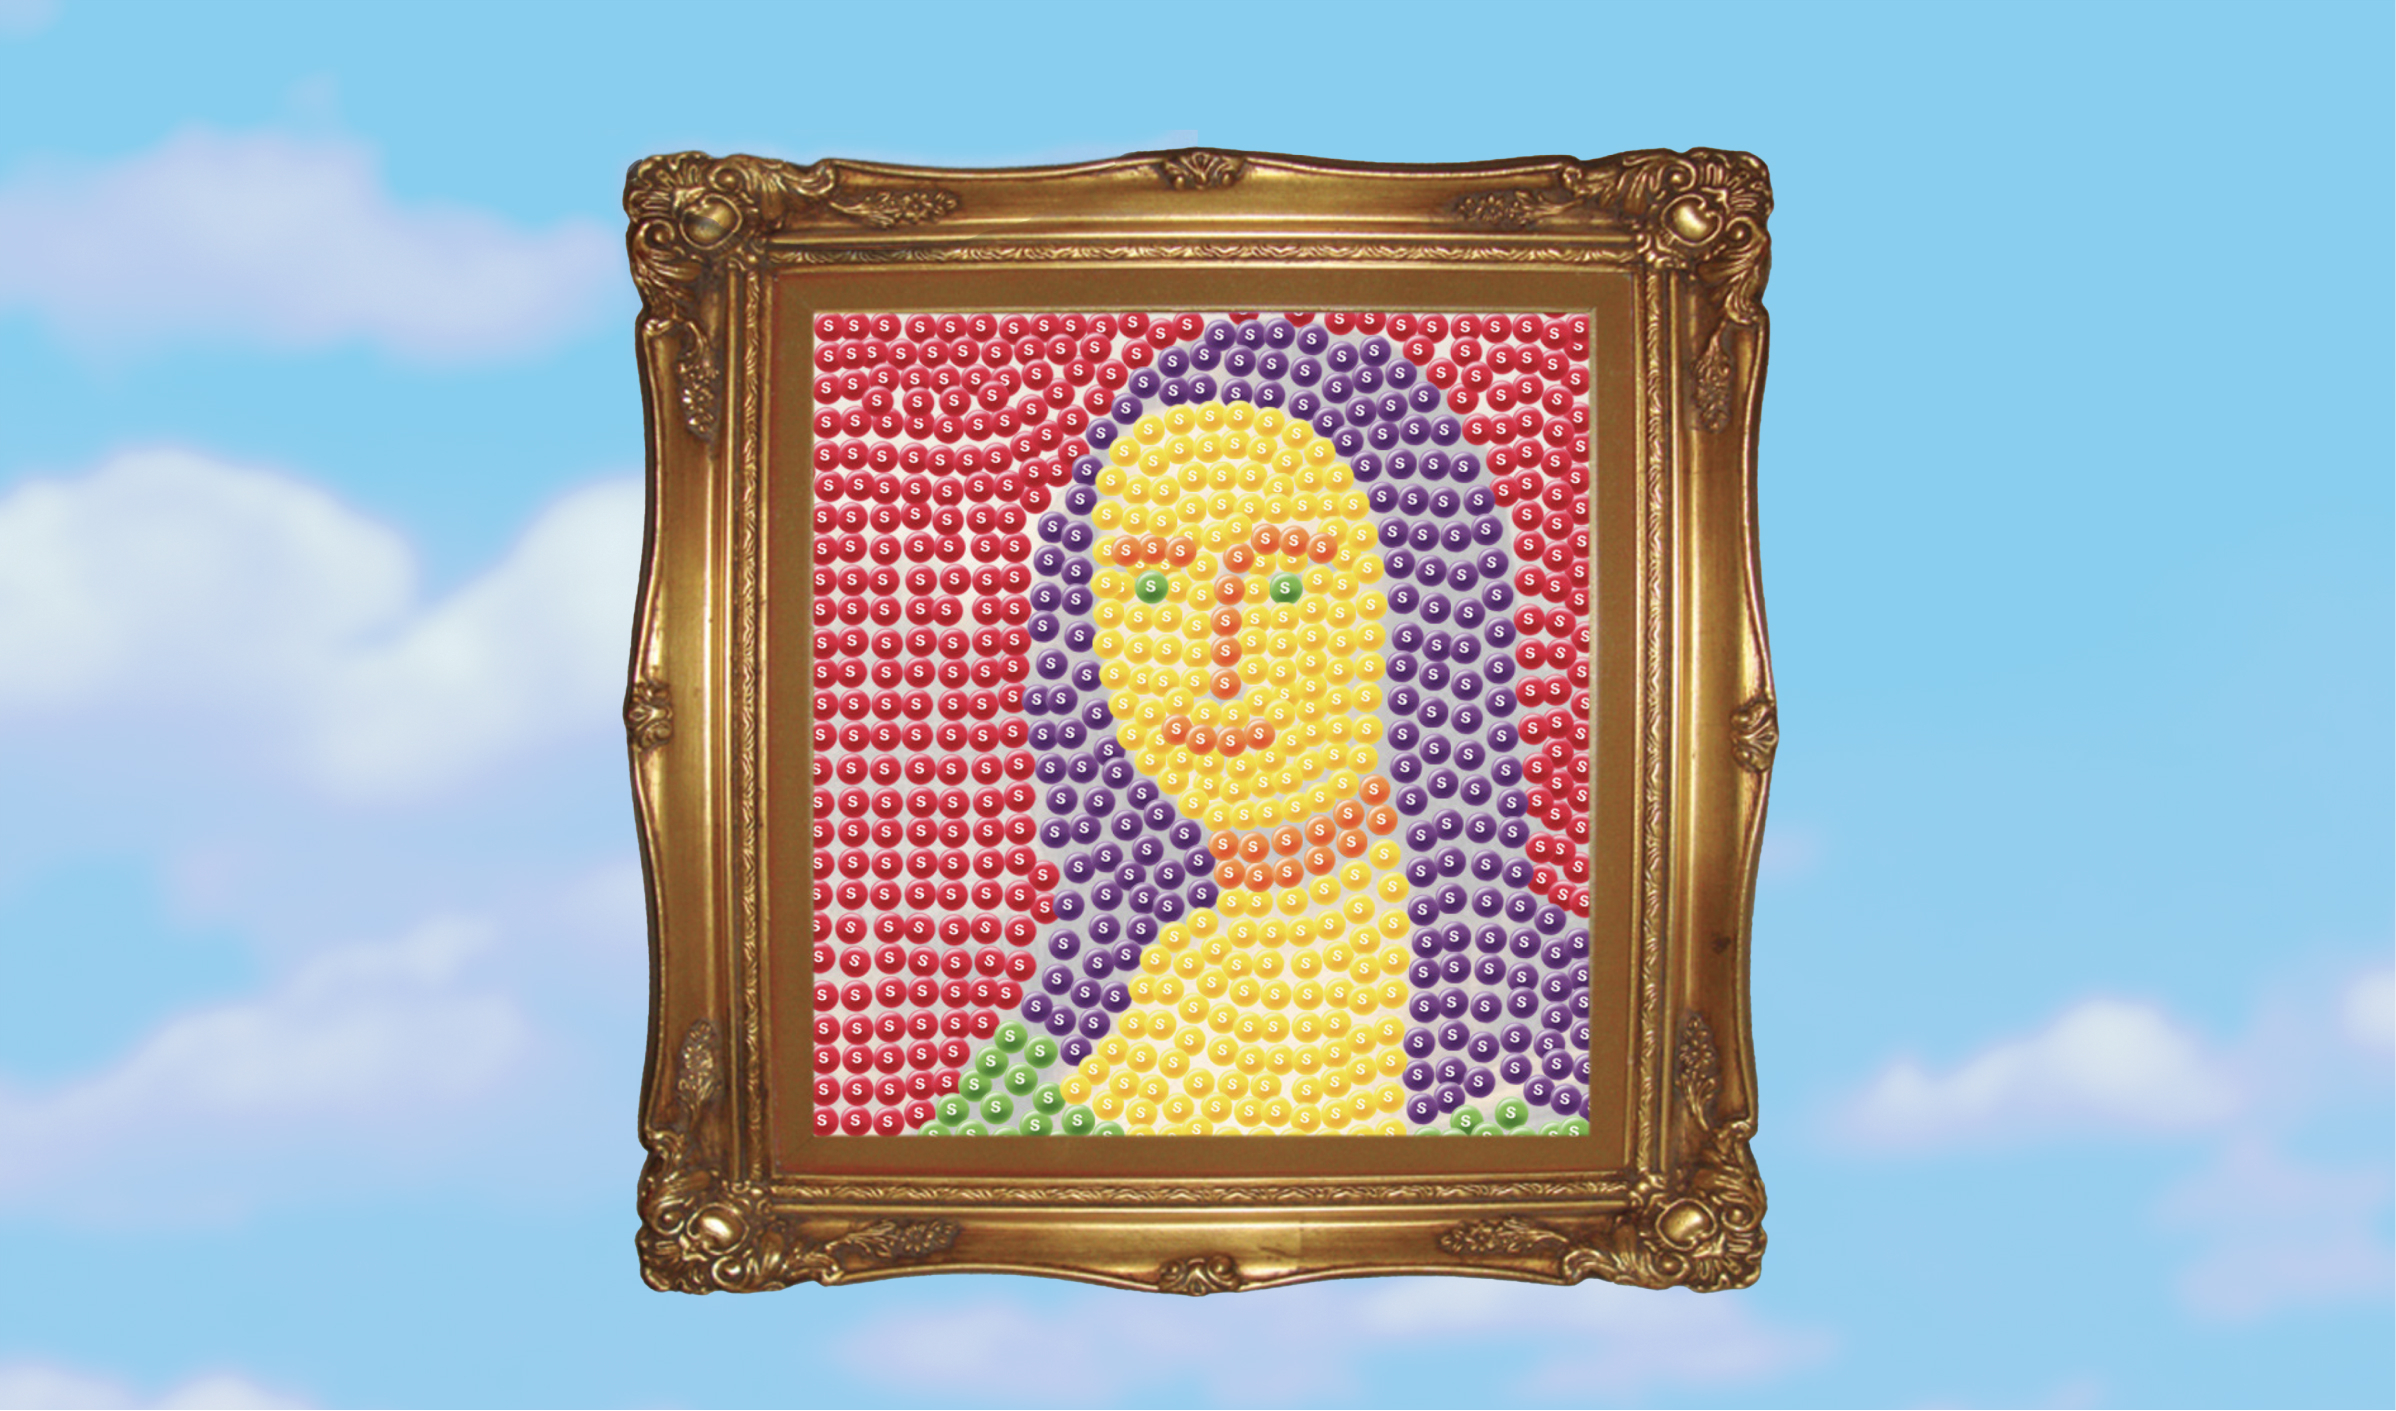 Mona Lisa made out skittles 